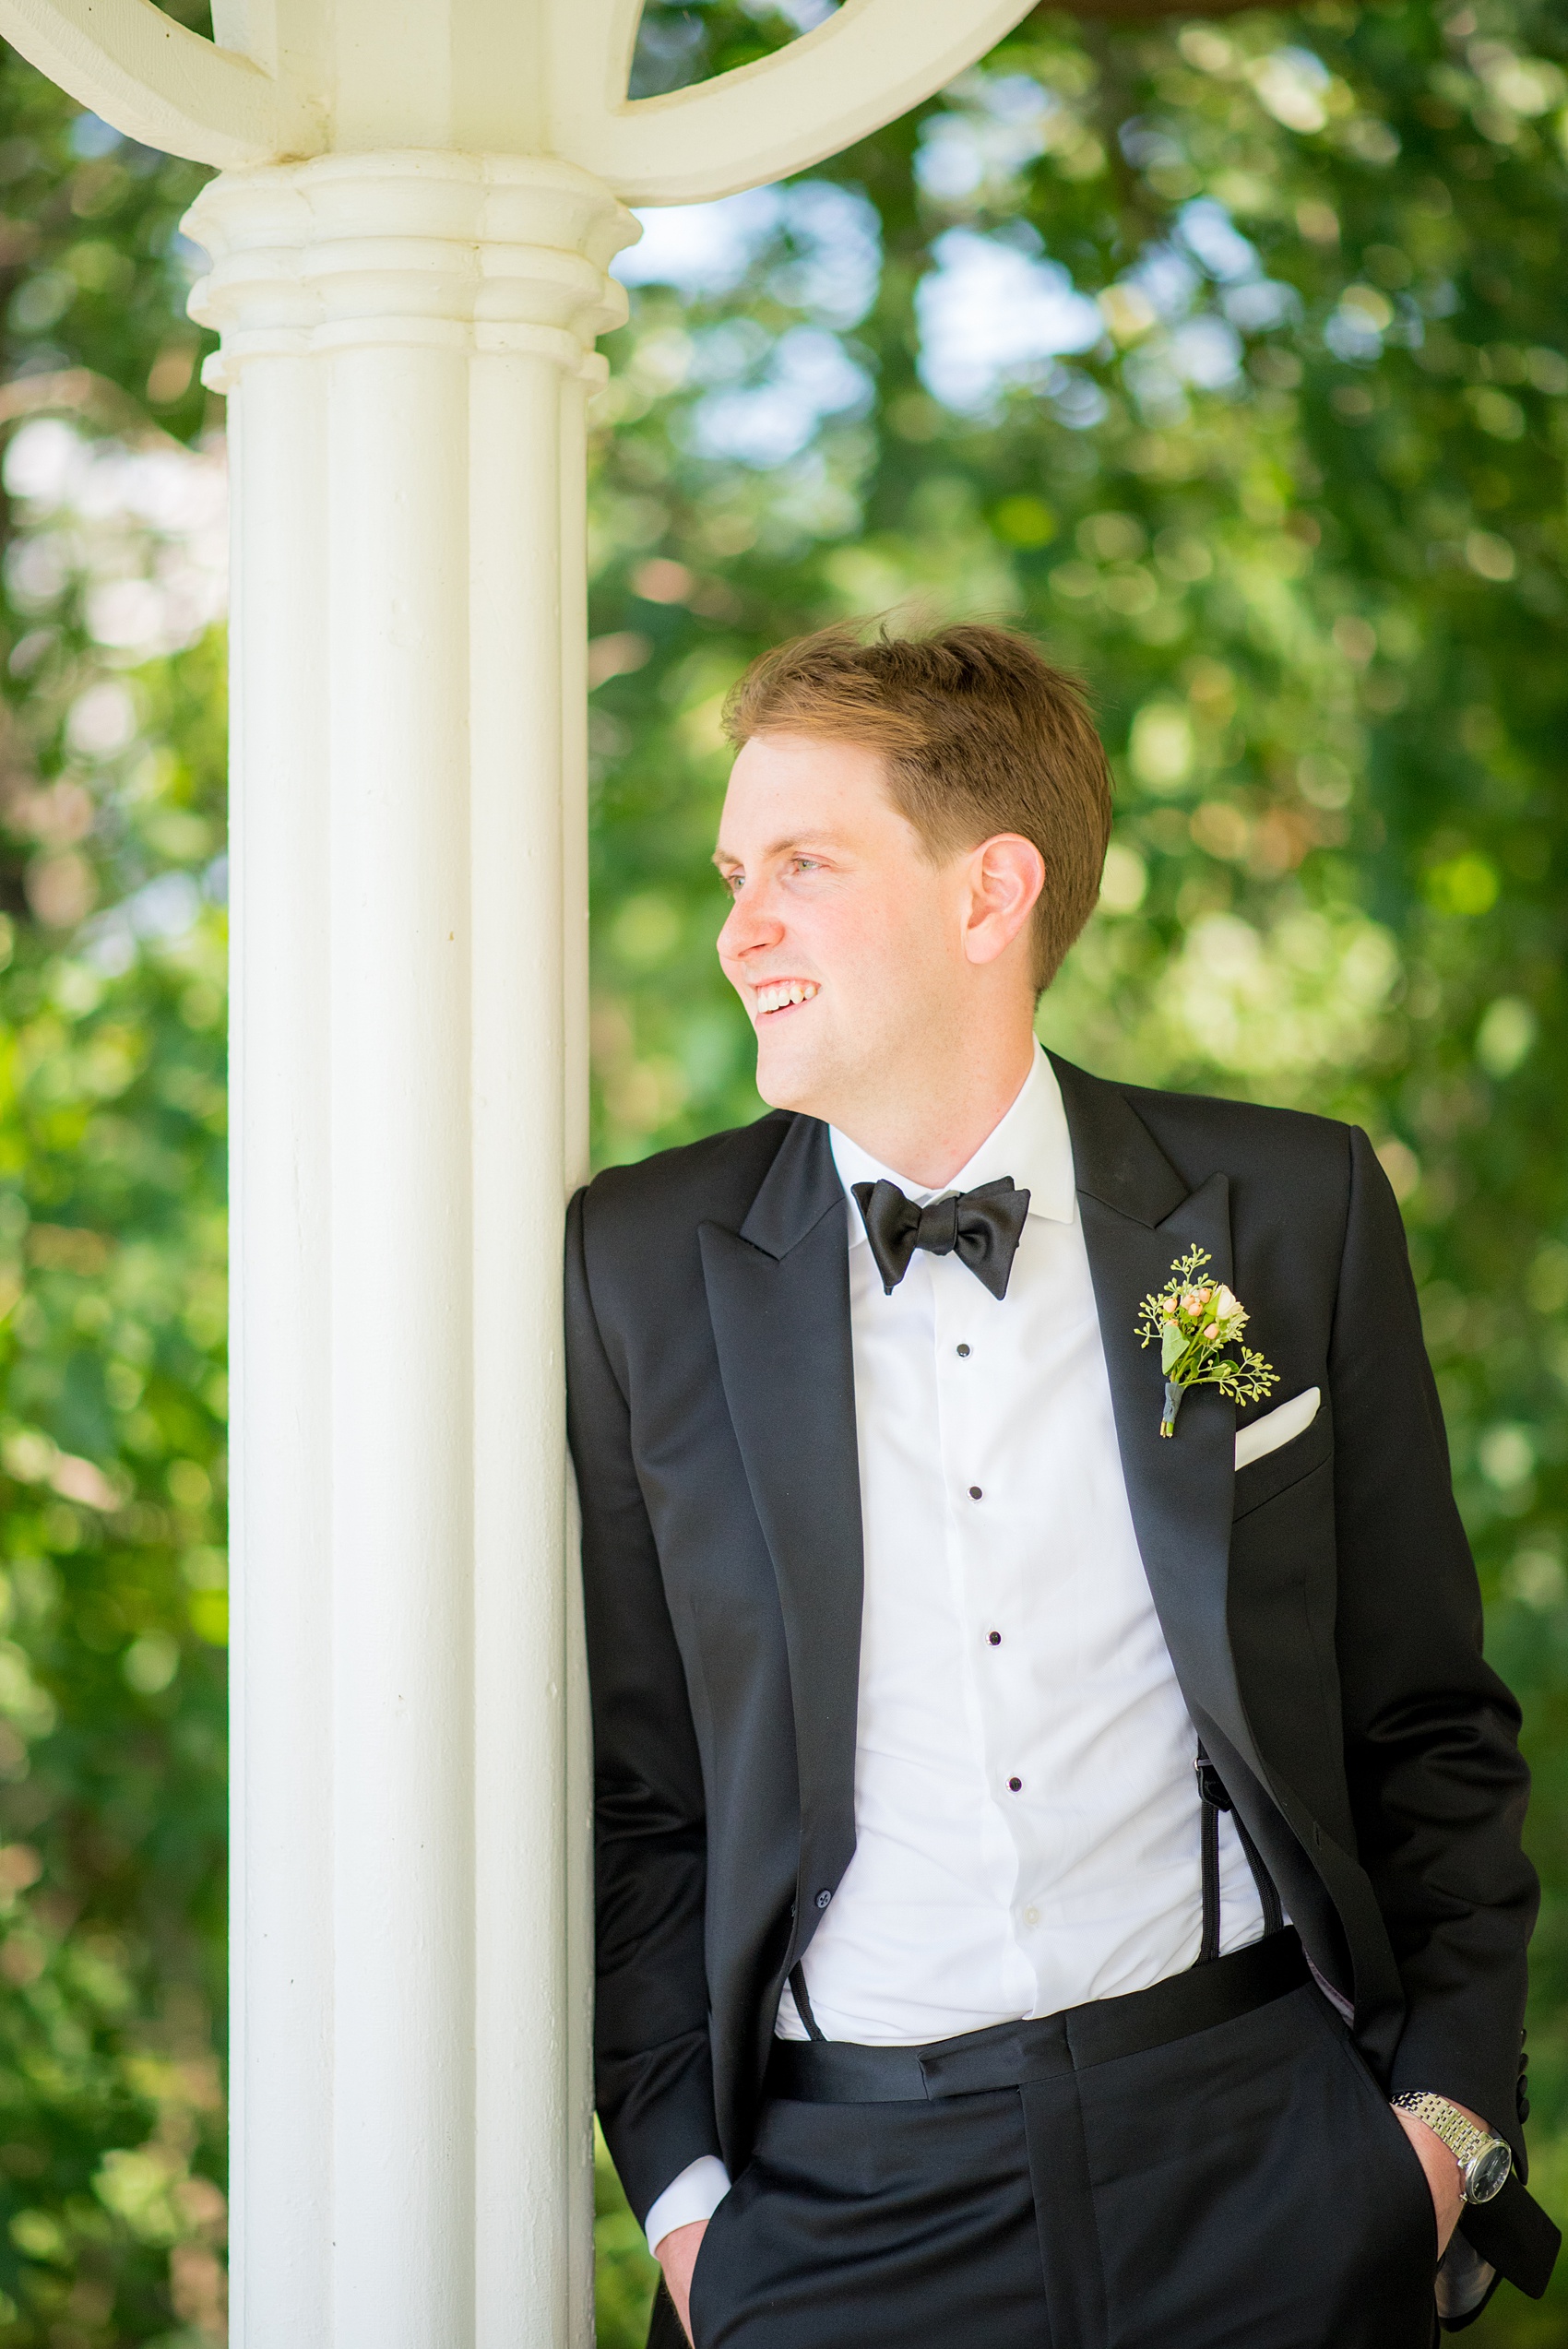 Mikkel Paige Photography photos from a Southwood Estate Wedding in Germantown, New York in the Hudson Valley. Picture of the groom in a classic black tuxedo.